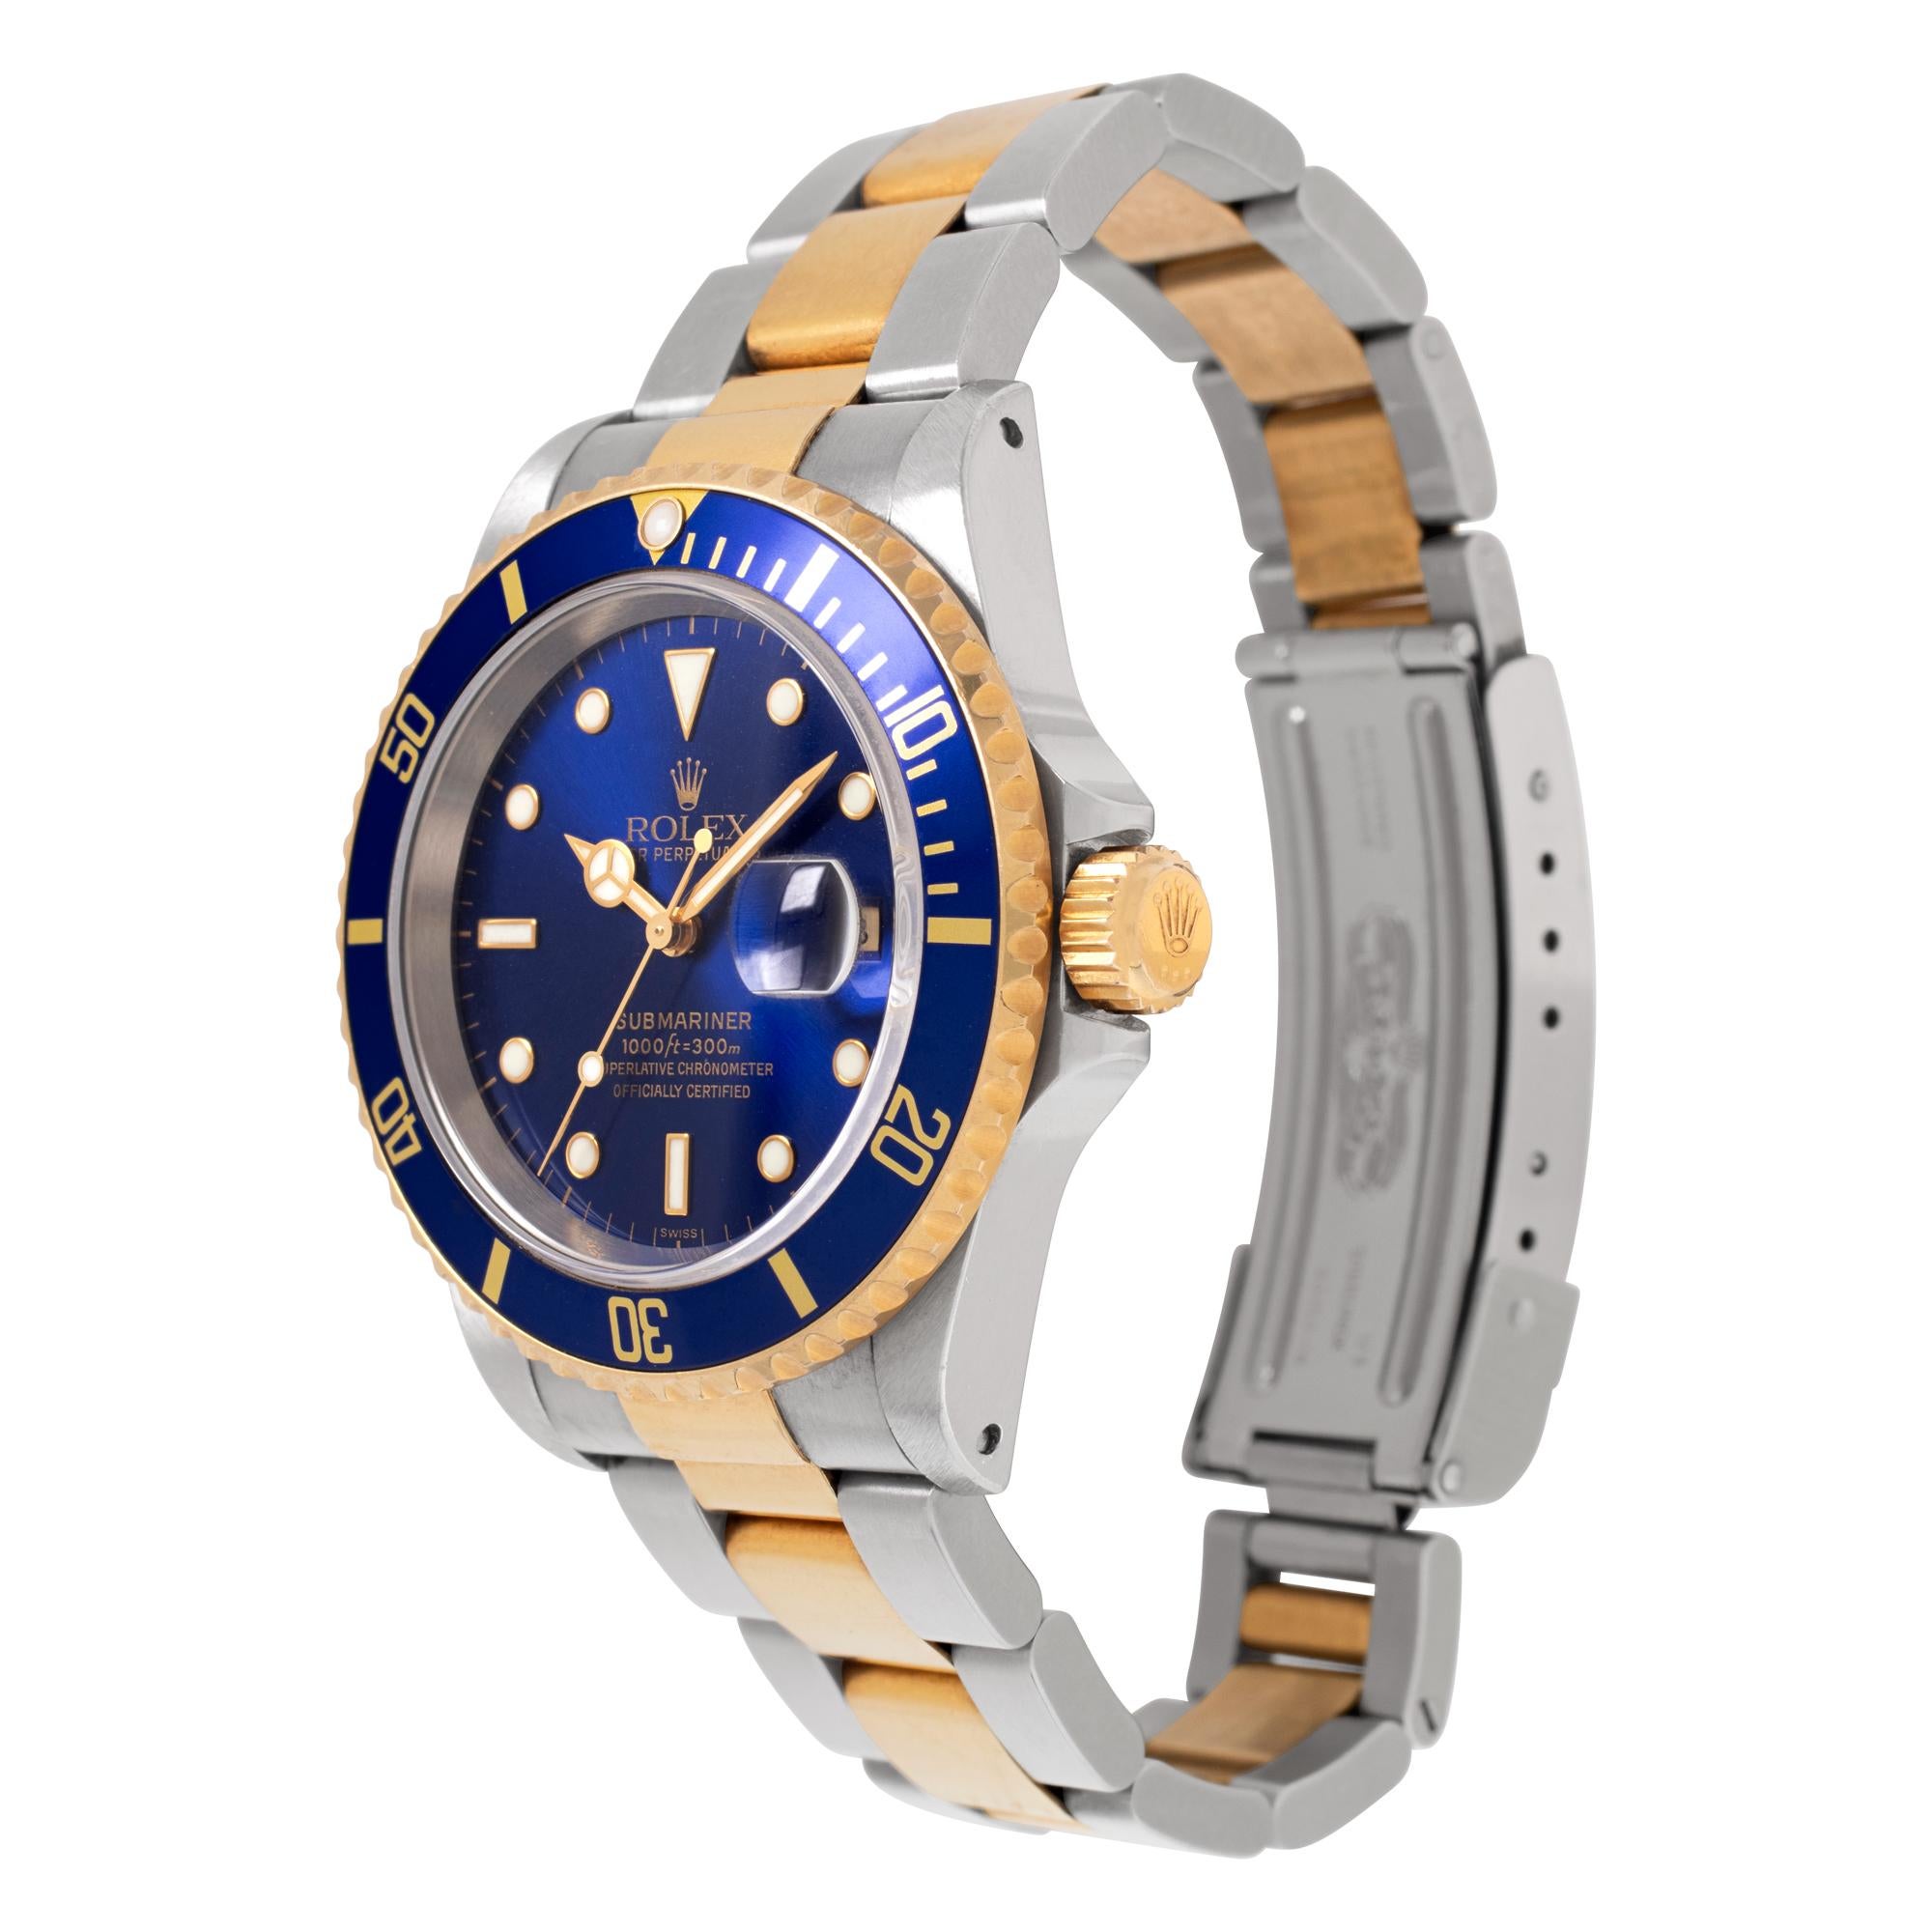 Rolex Submariner in 18k yellow gold and stainless steel with blue dial. Auto w/ sweep seconds and date. 40 mm case size. **Bank wire only at this price** Ref 16613. Circa 1997. Fine Pre-owned Rolex Watch. Certified preowned Sport Rolex Submariner